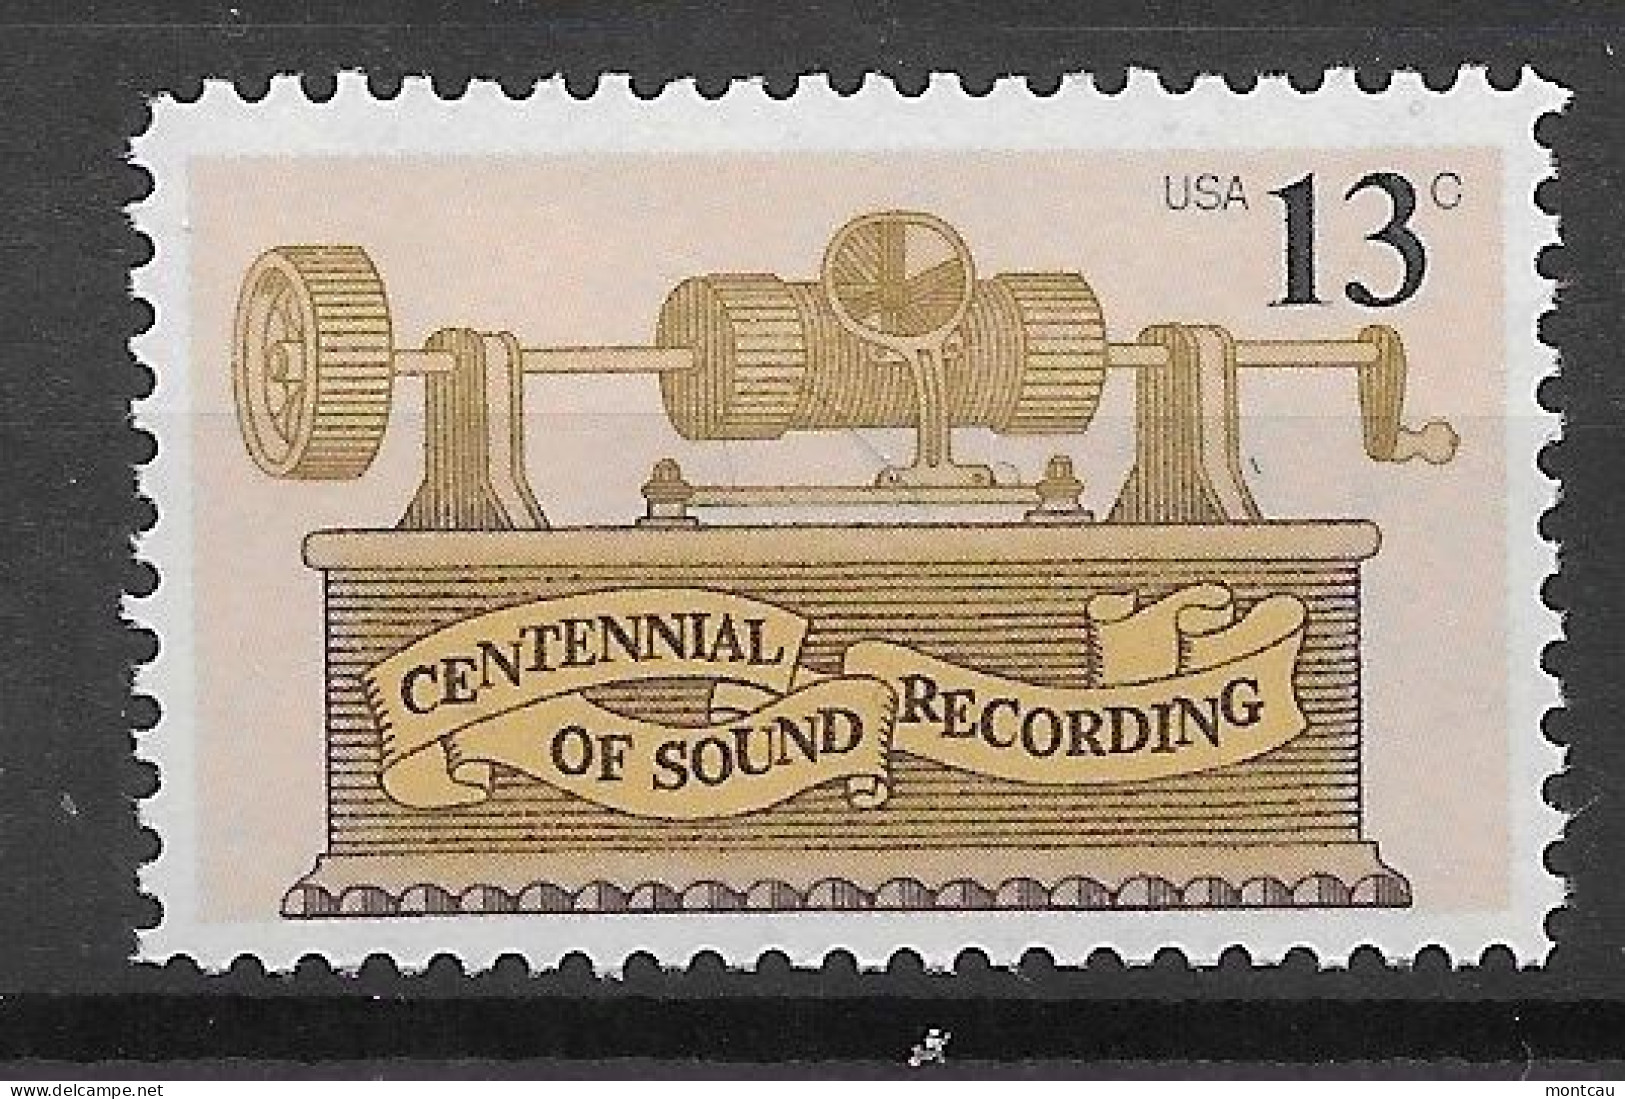 USA 1972.  Electronica Sc 1705  (**) - Unused Stamps